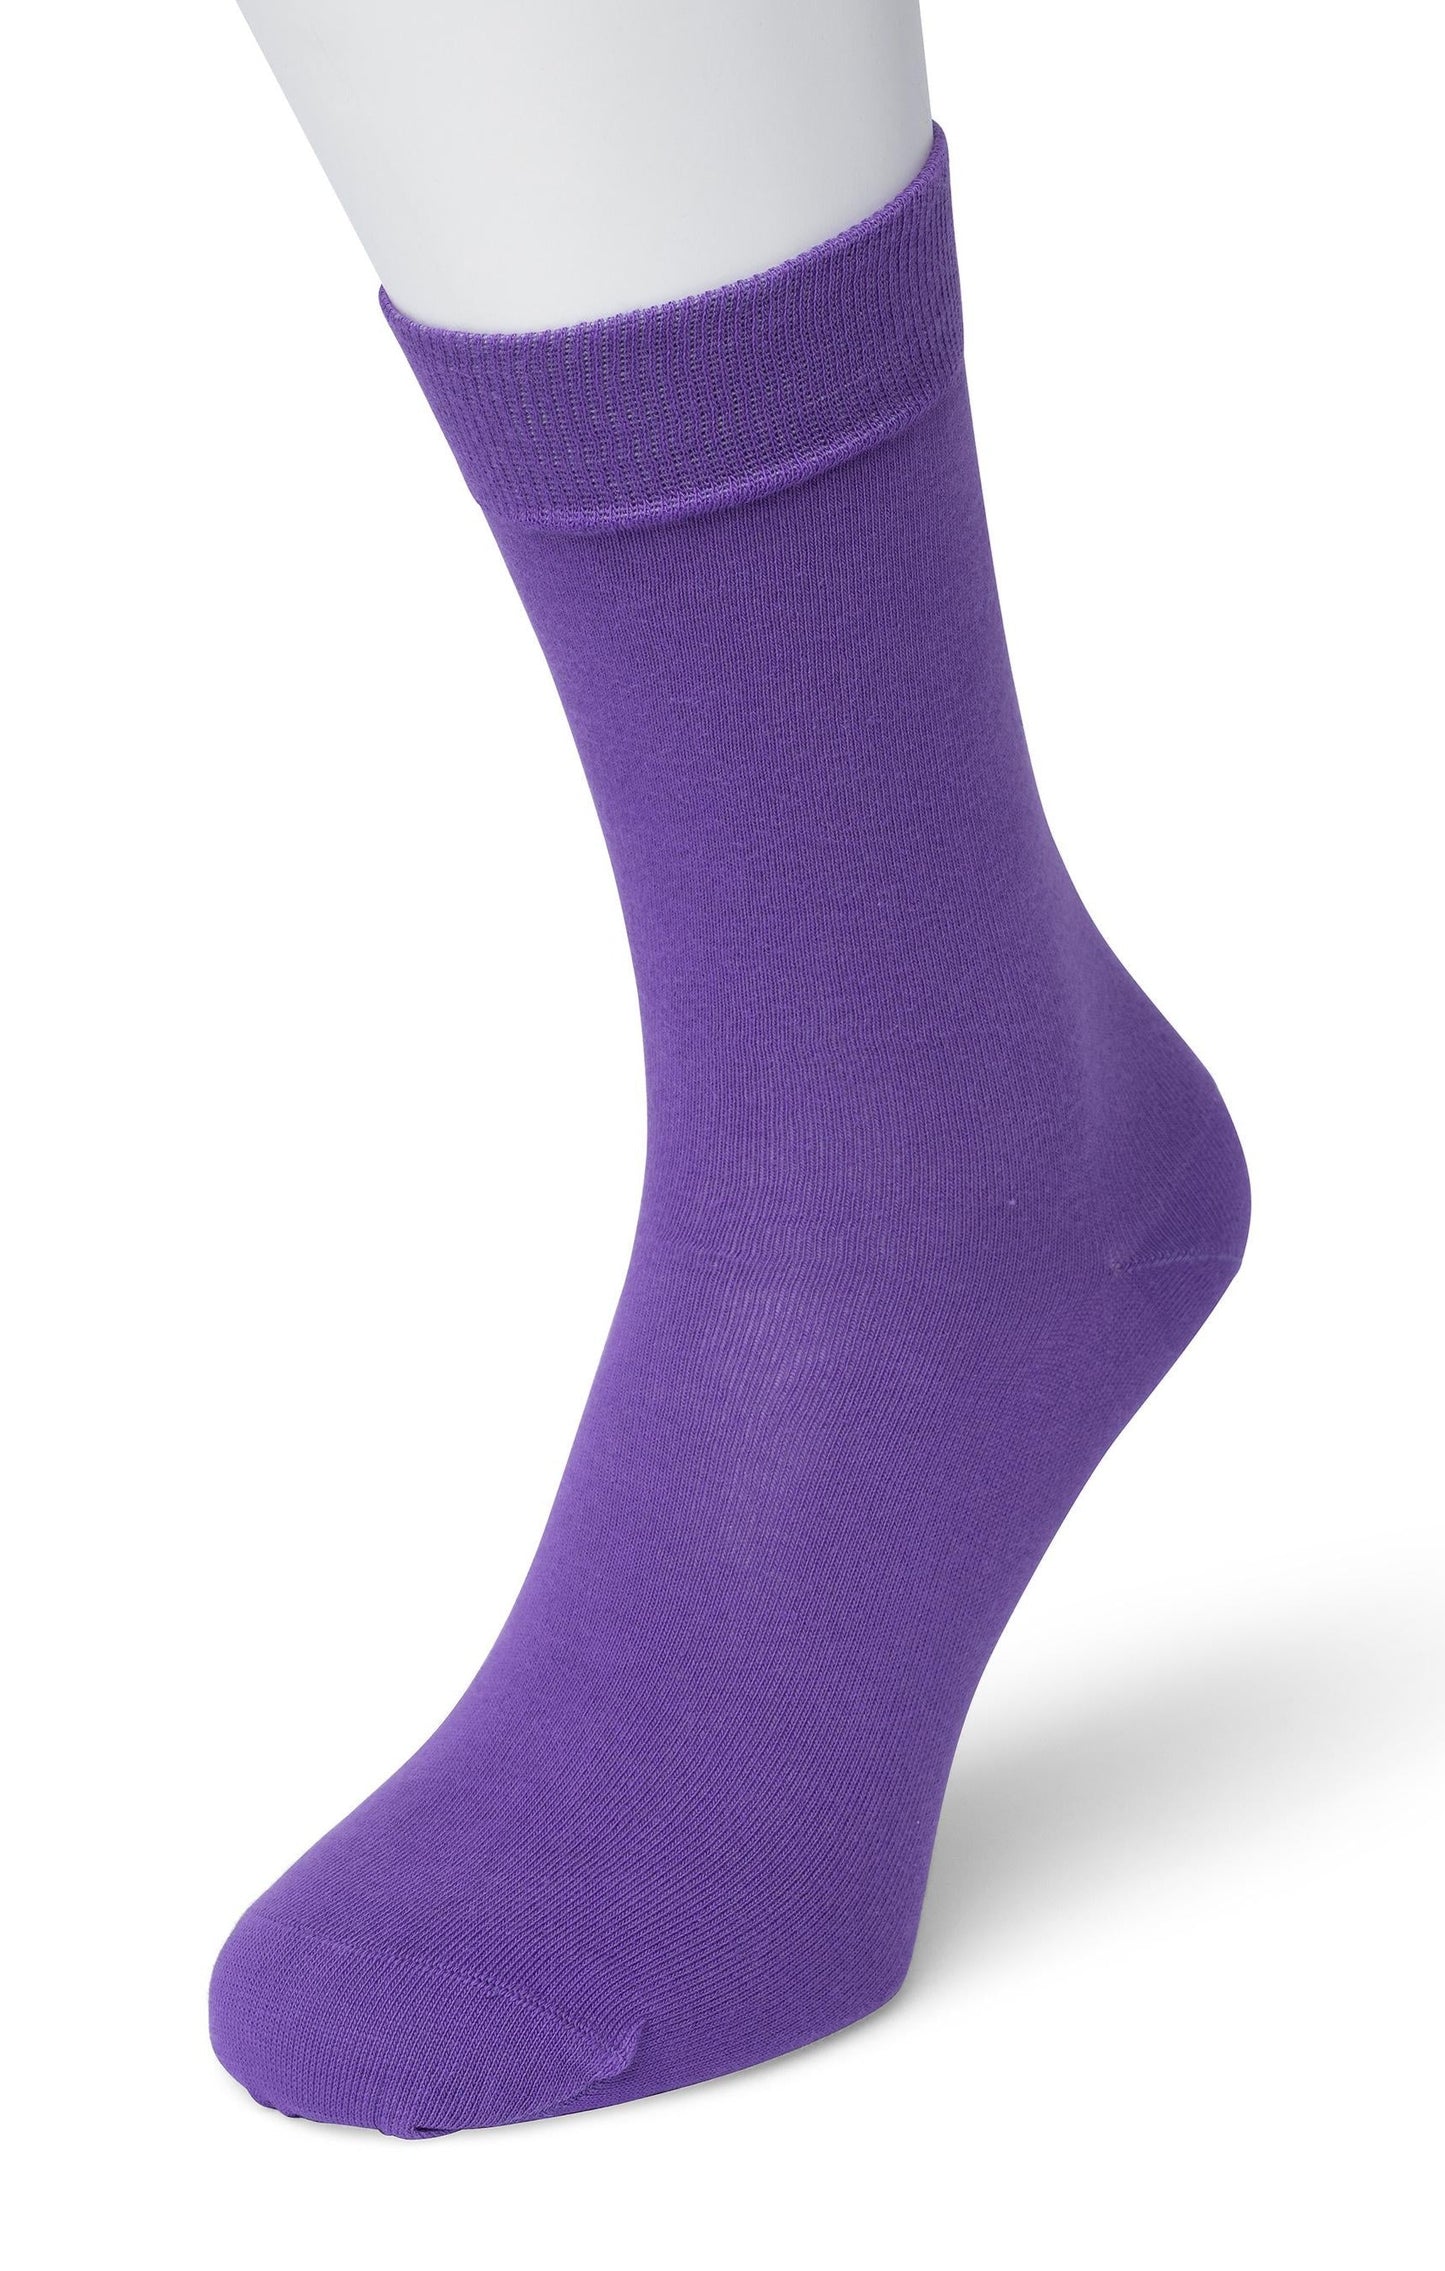 Bonnie Doon 83422 / BD632401 Cotton Sock -  Purple ankle socks available in men and women sizes